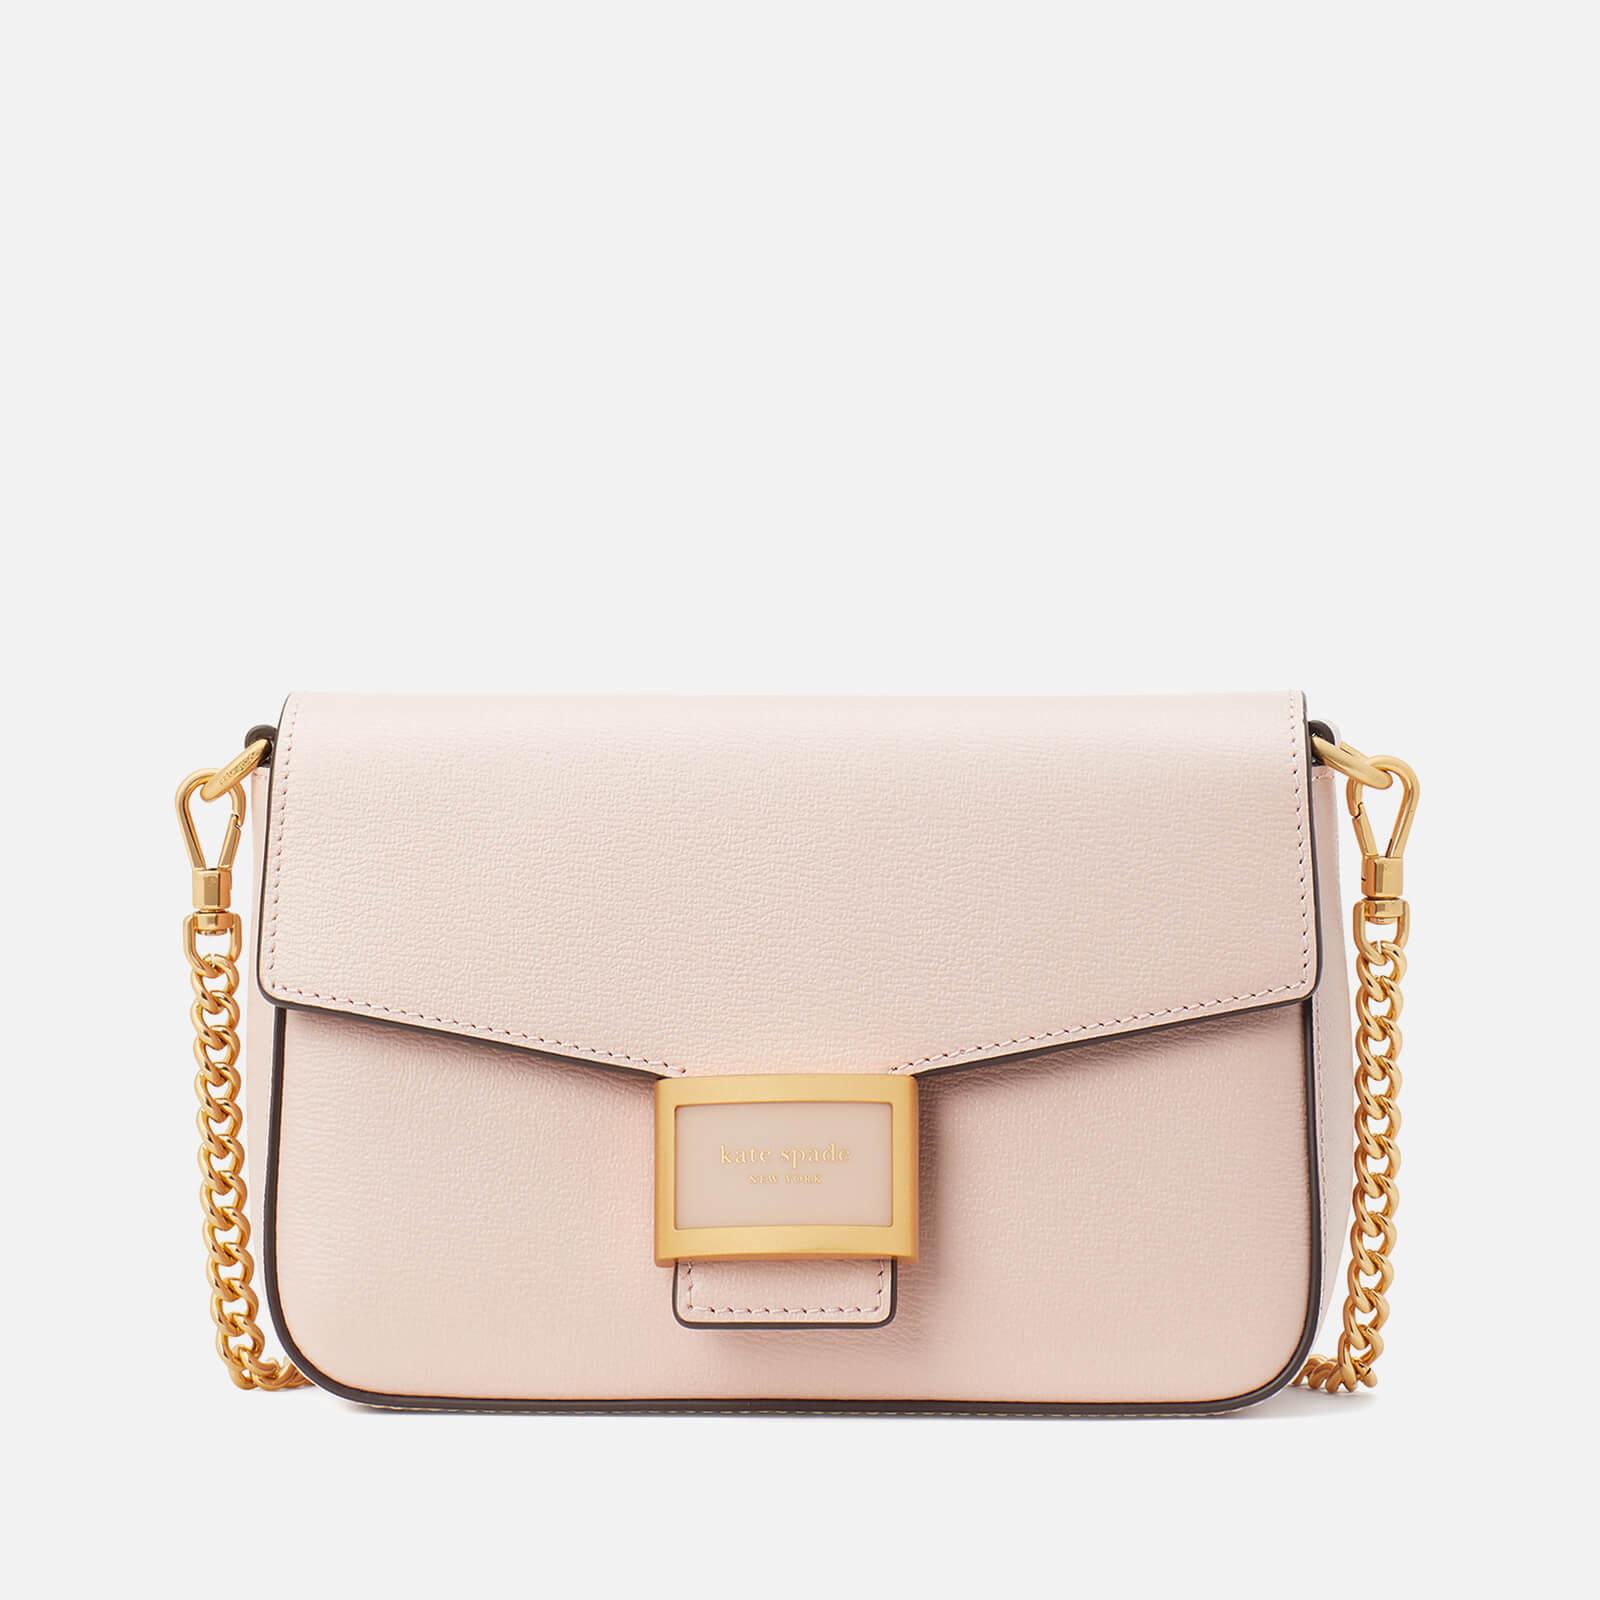 Kate Spade Katy Flap Chain Leather Cross-body Bag in Natural | Lyst